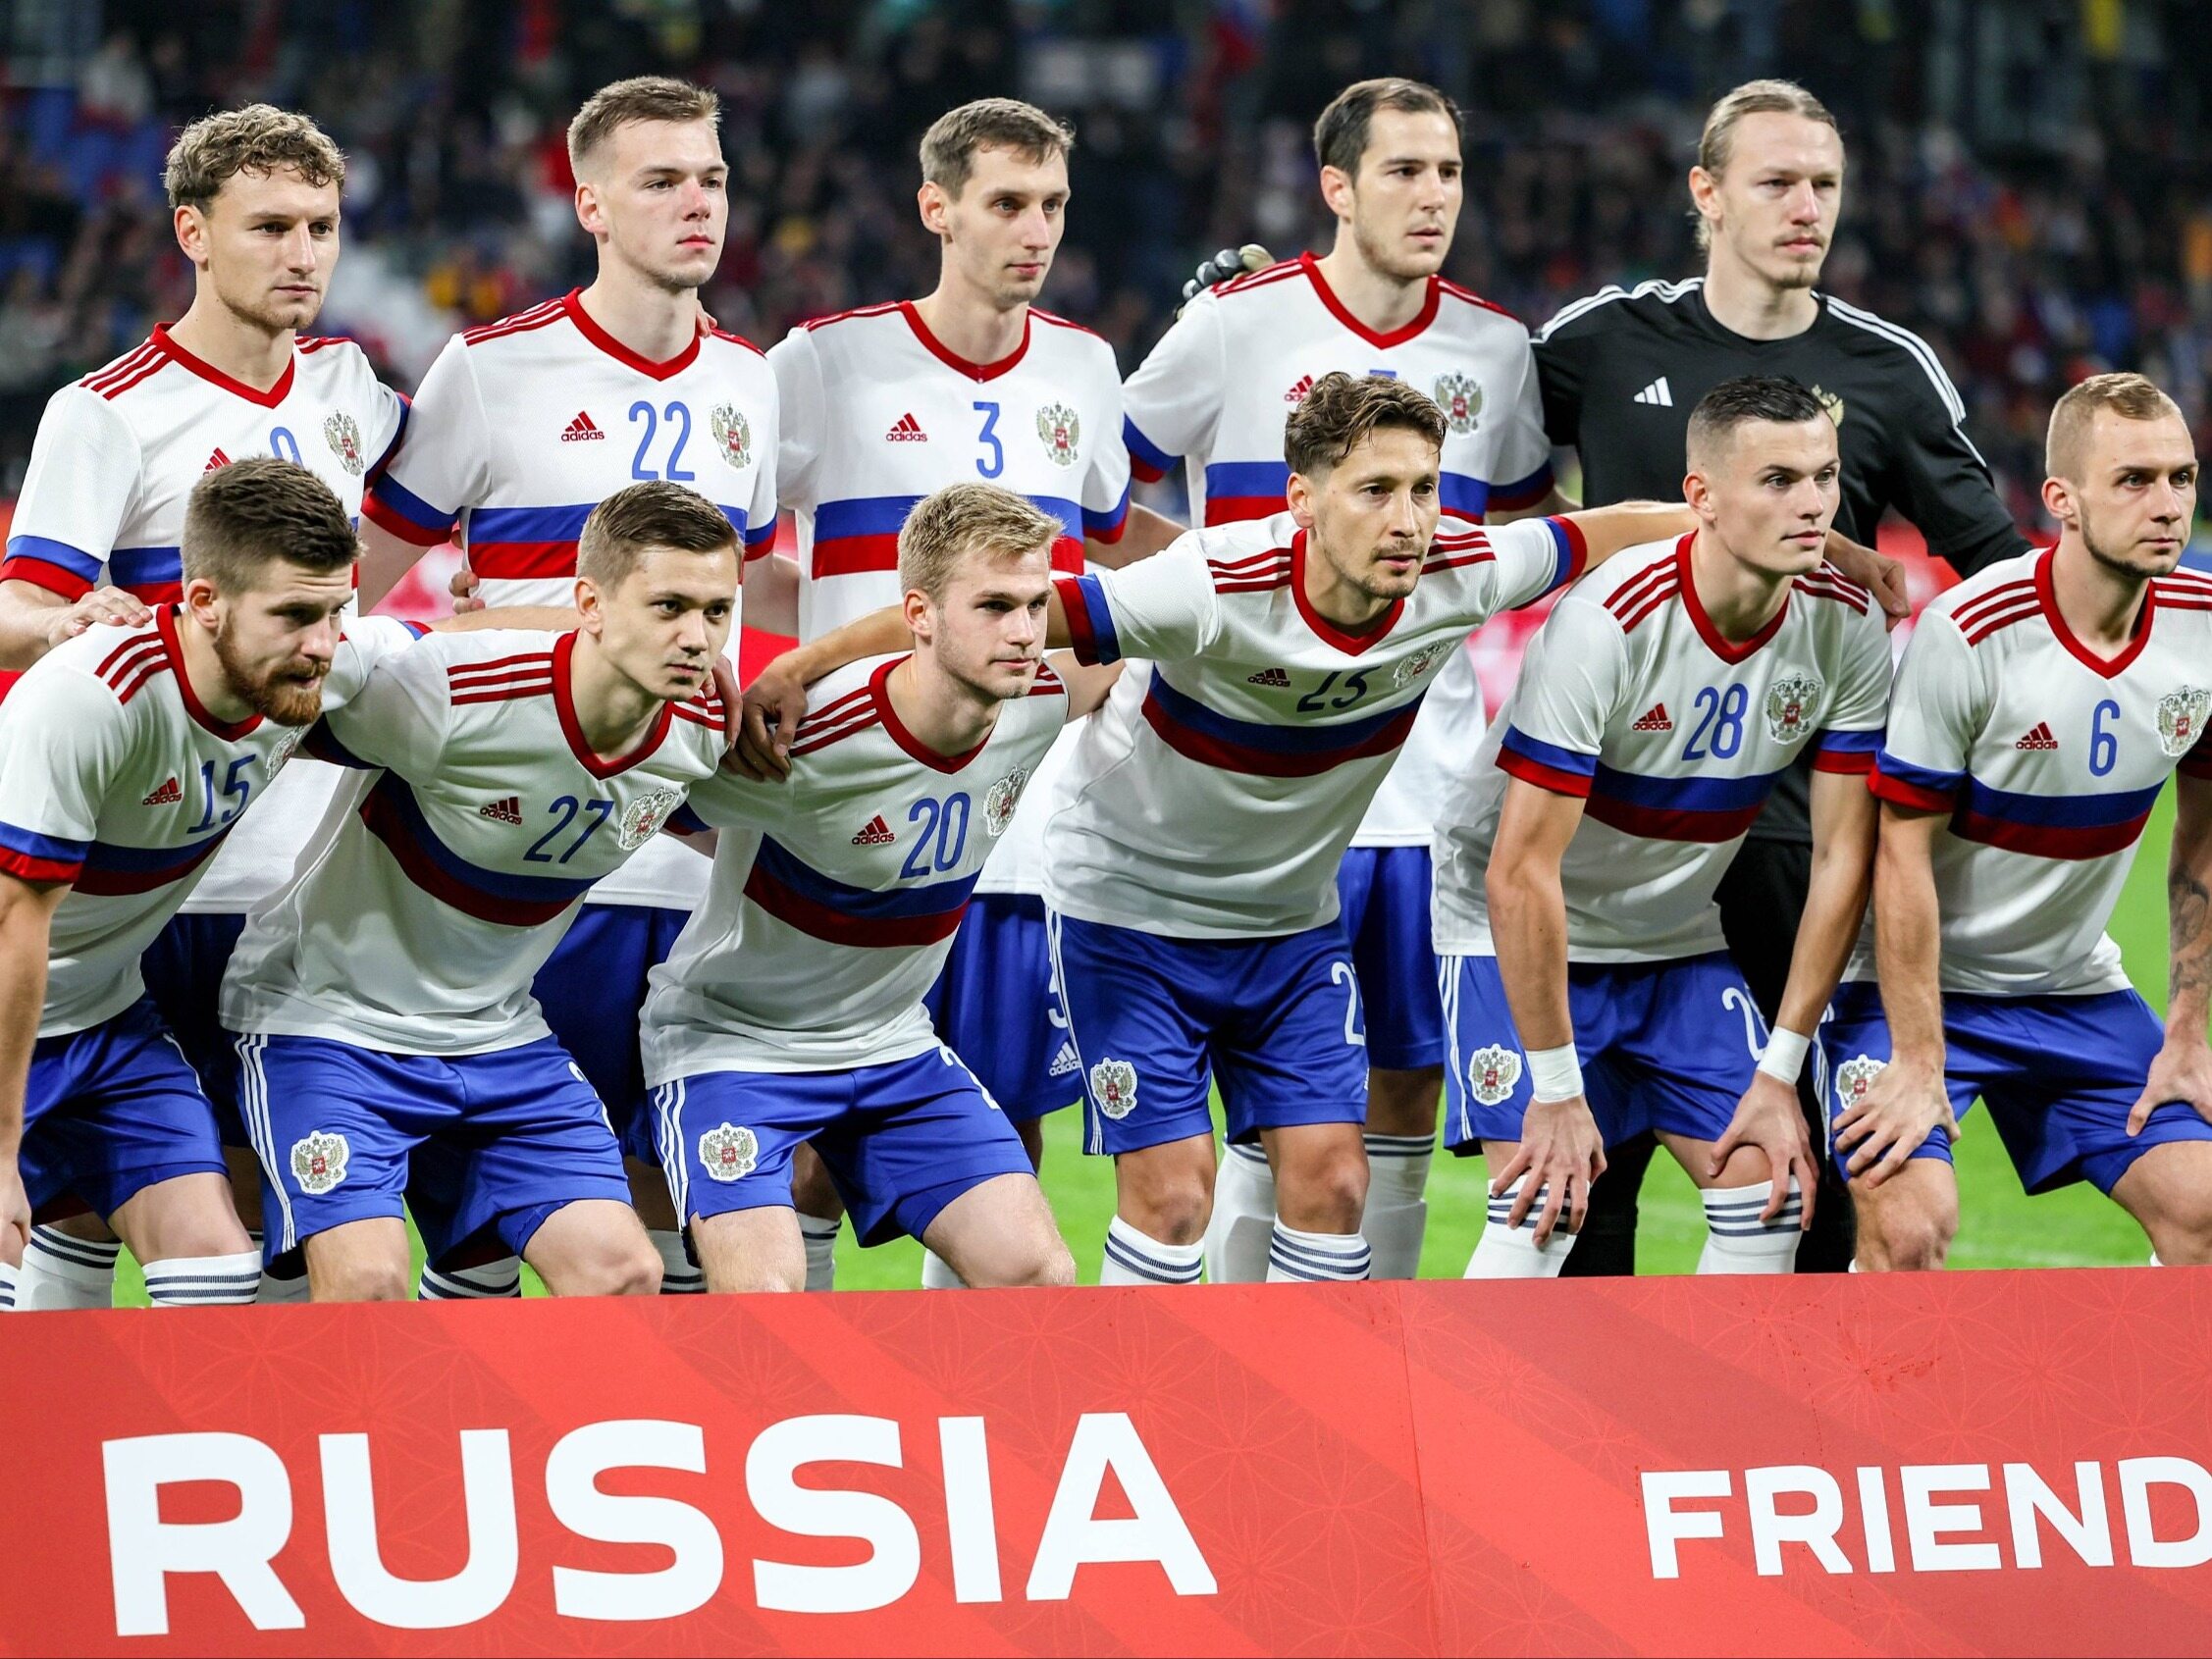 A sensational declaration by Russia.  They want to organize the football EURO